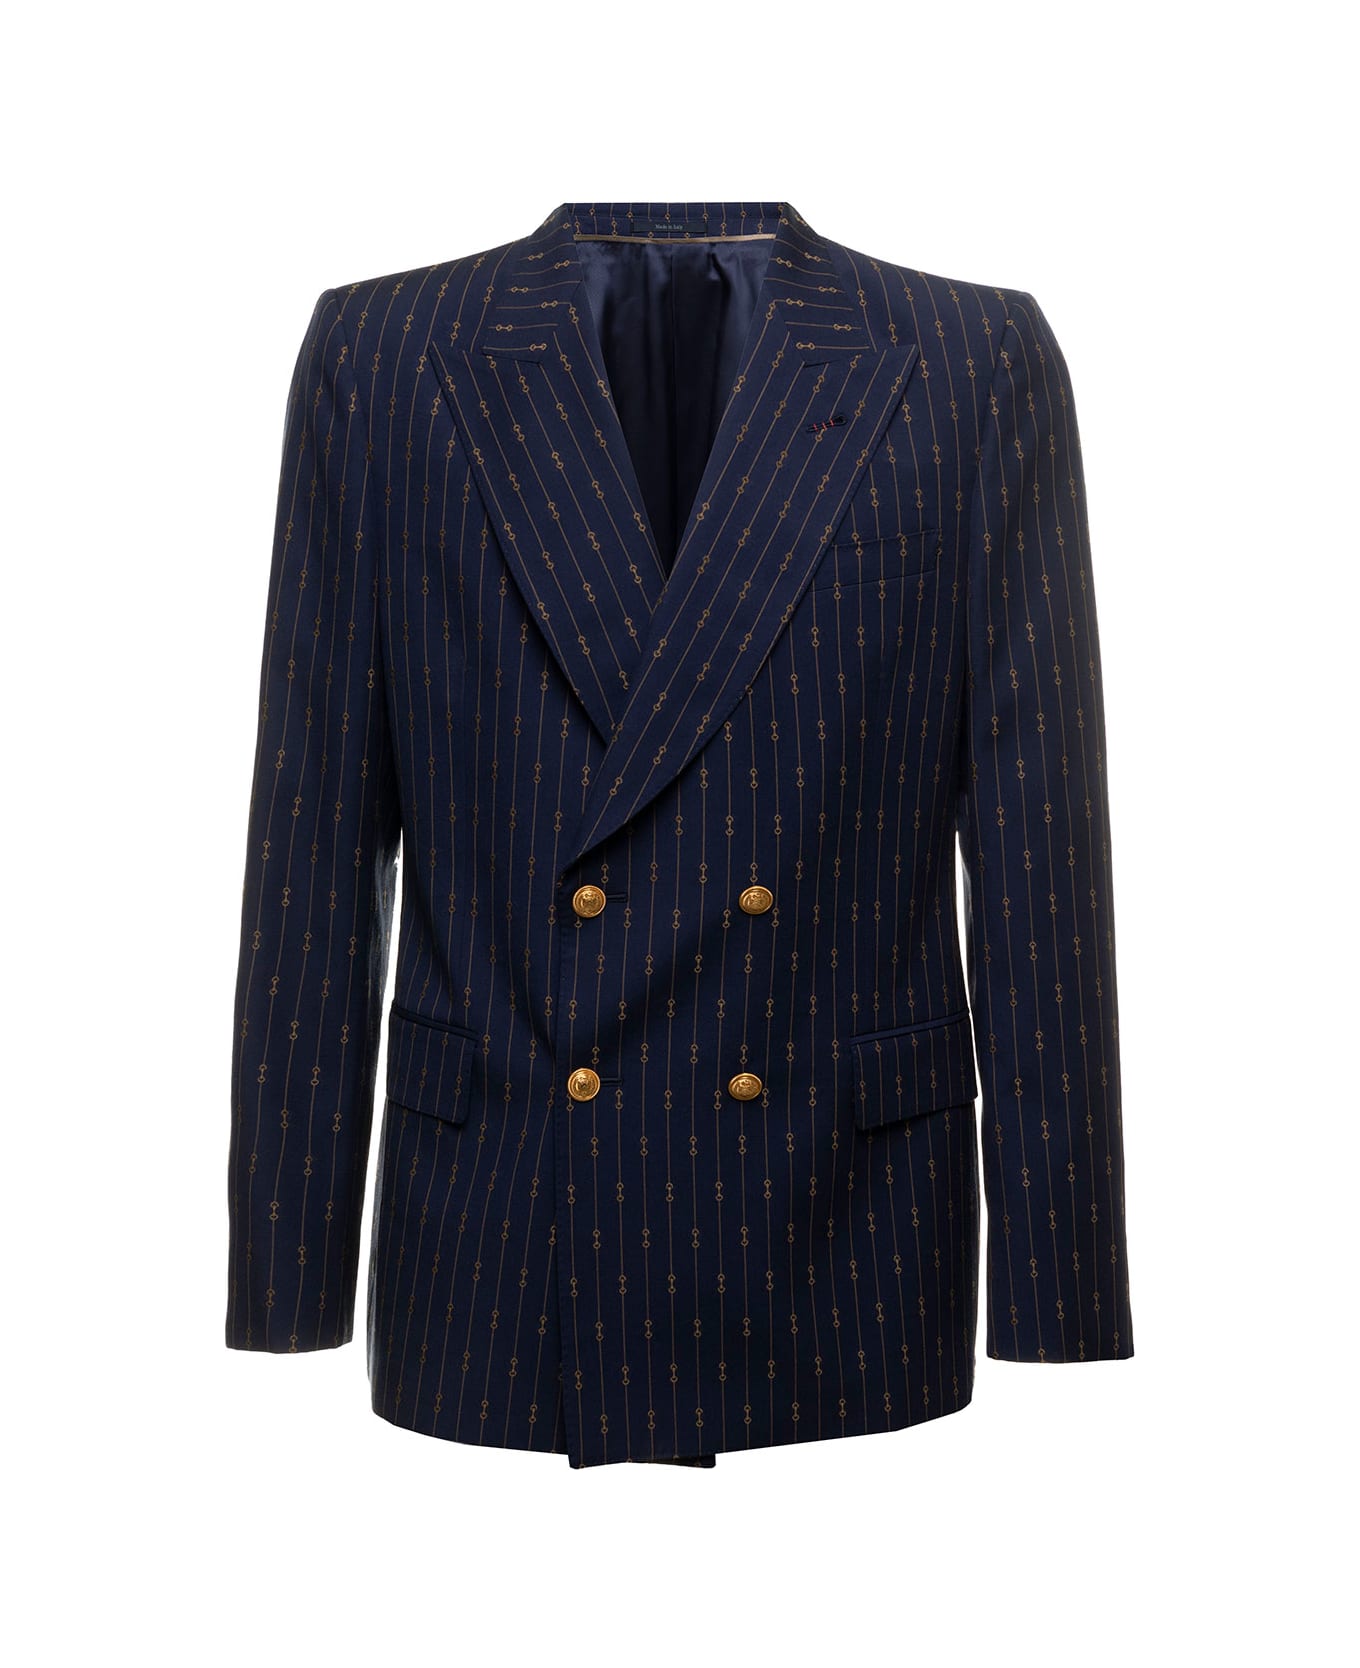 Gucci Man's Blue Printed Wool Double-breasted Blazer - blue ブレザー